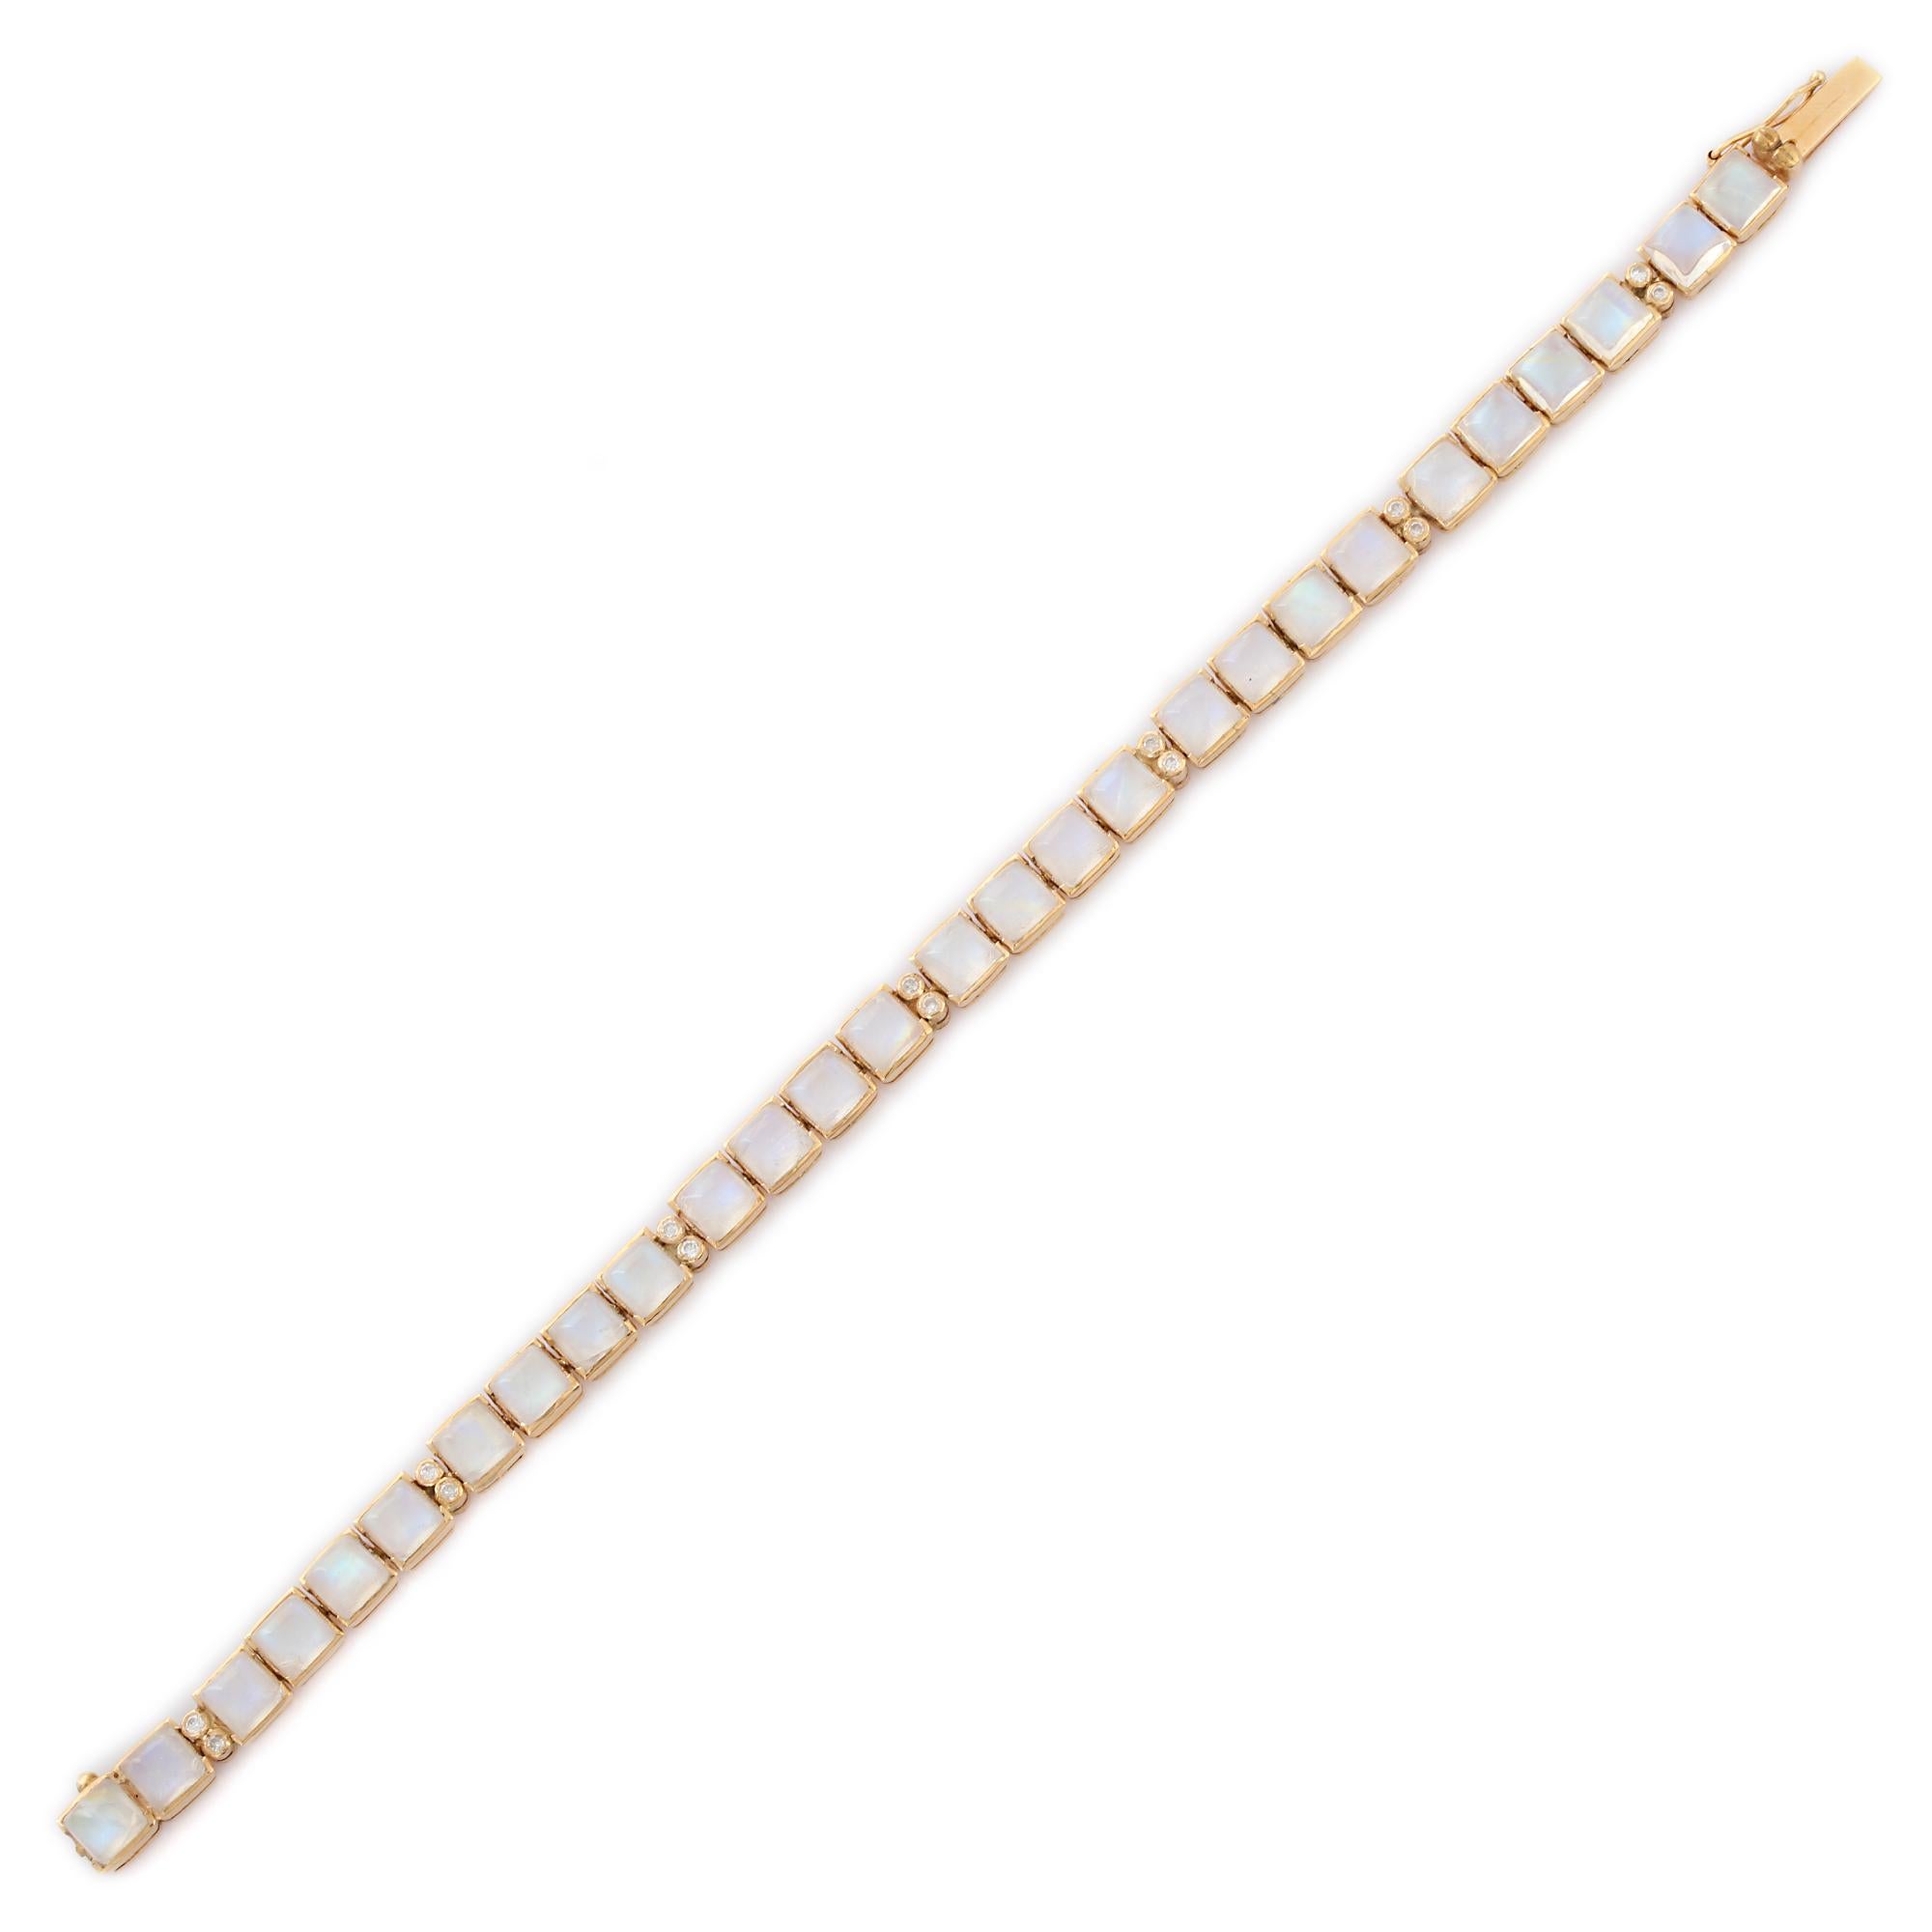 Bracelets are worn to enhance the look. Women love to look good. It is common to see a woman rocking a lovely gold bracelet on her wrist. A gold gemstone bracelet is the ultimate statement piece for every stylish woman.
Moonstone and Diamond